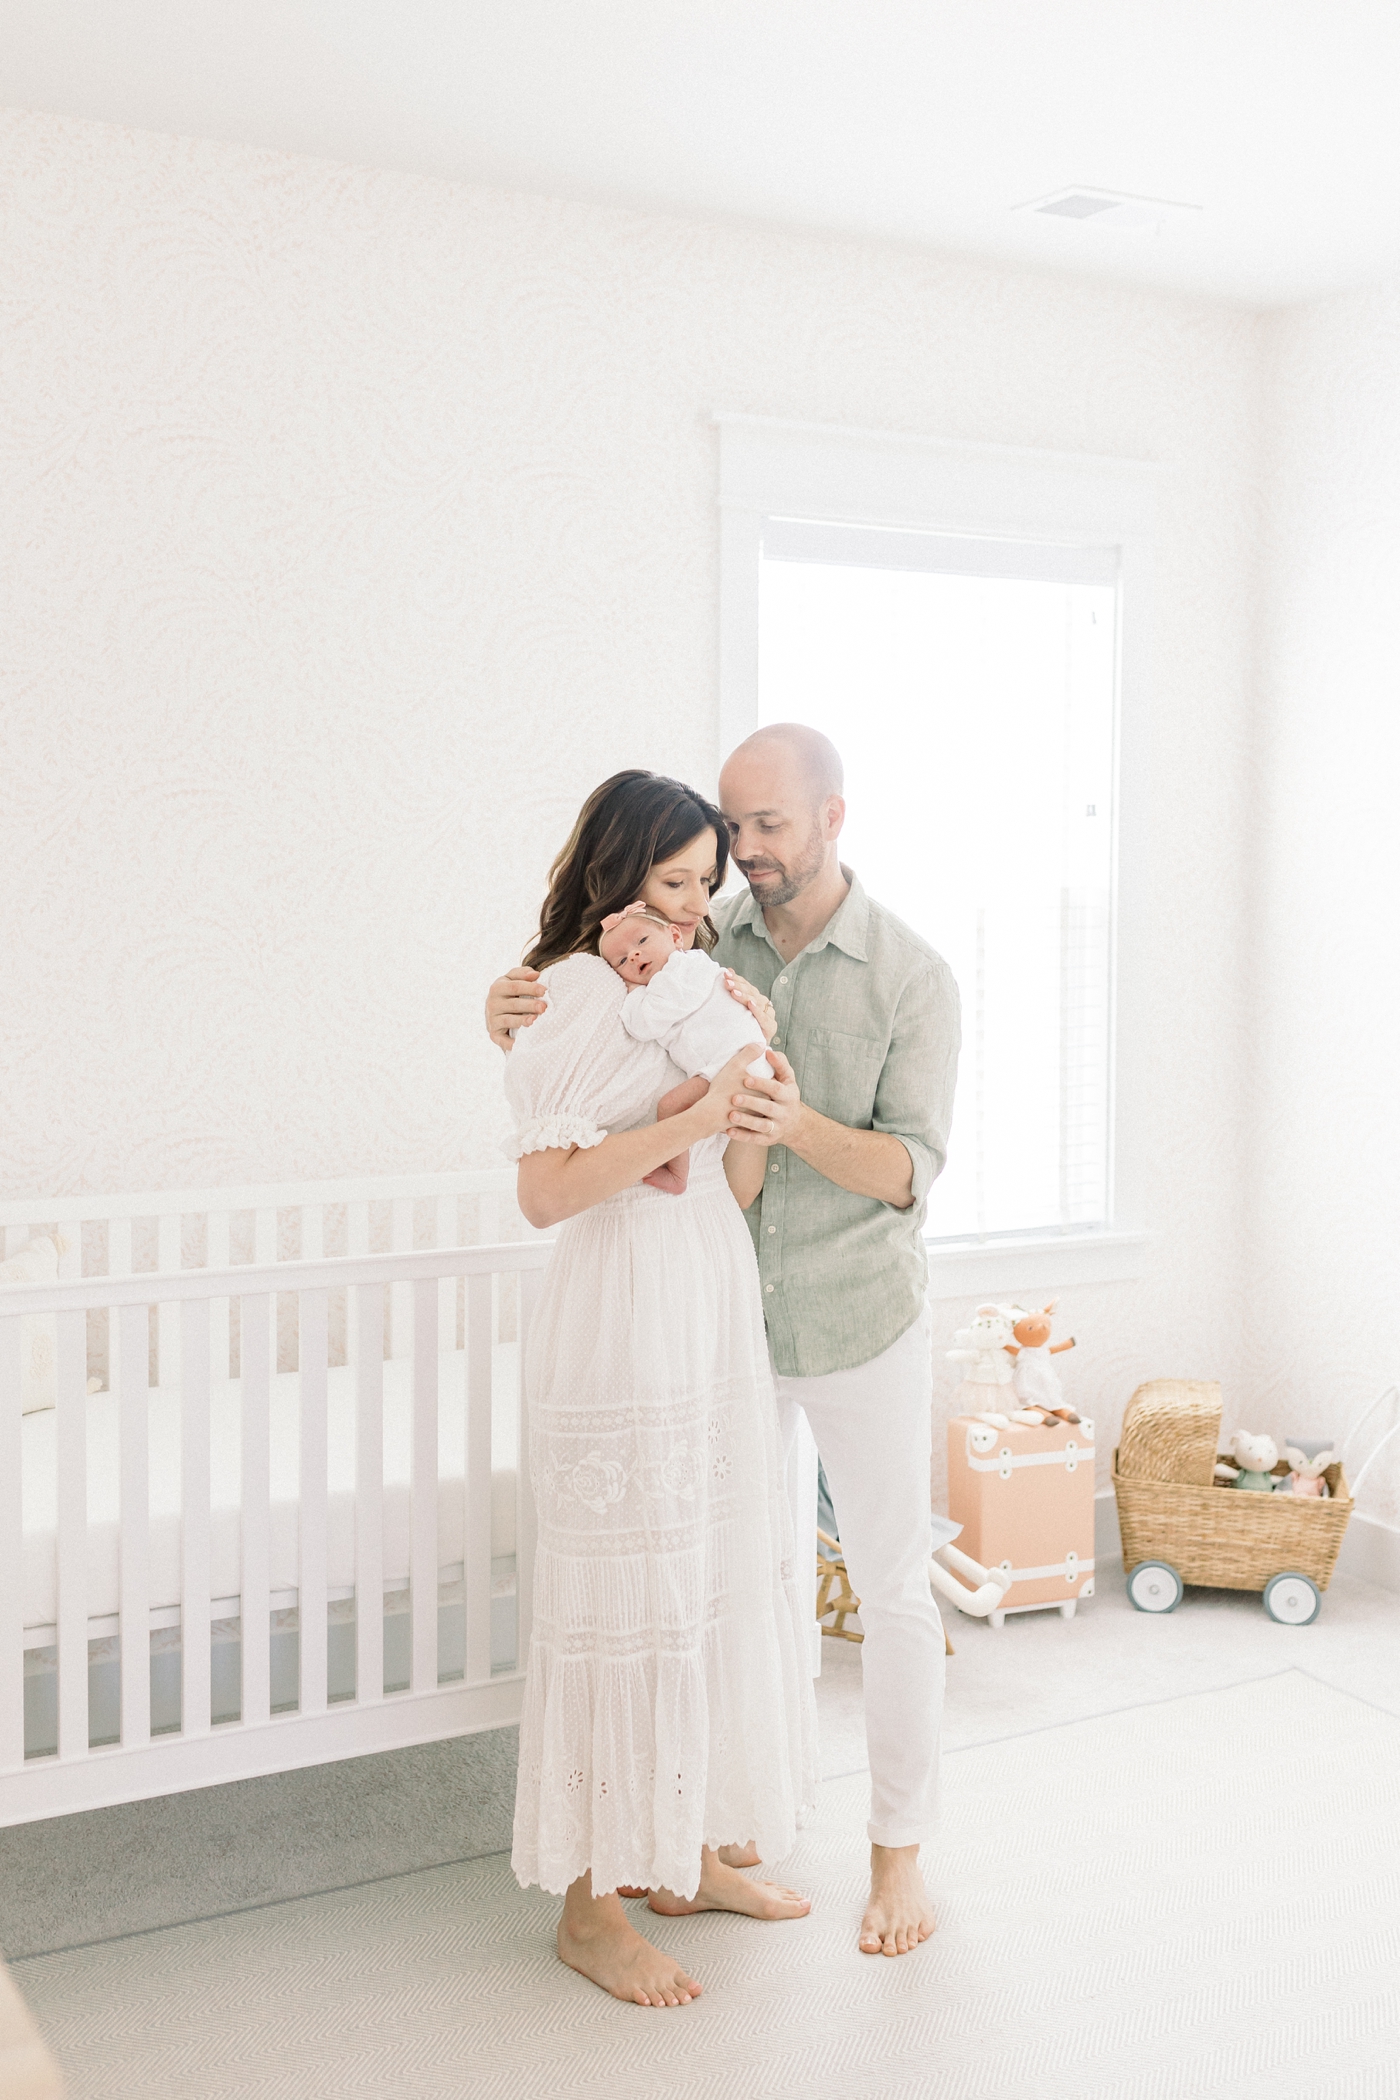 Mom and dad holding their new baby in her nursery during their lifestyle newborn session | Photo by Caitlyn Motycka Photography